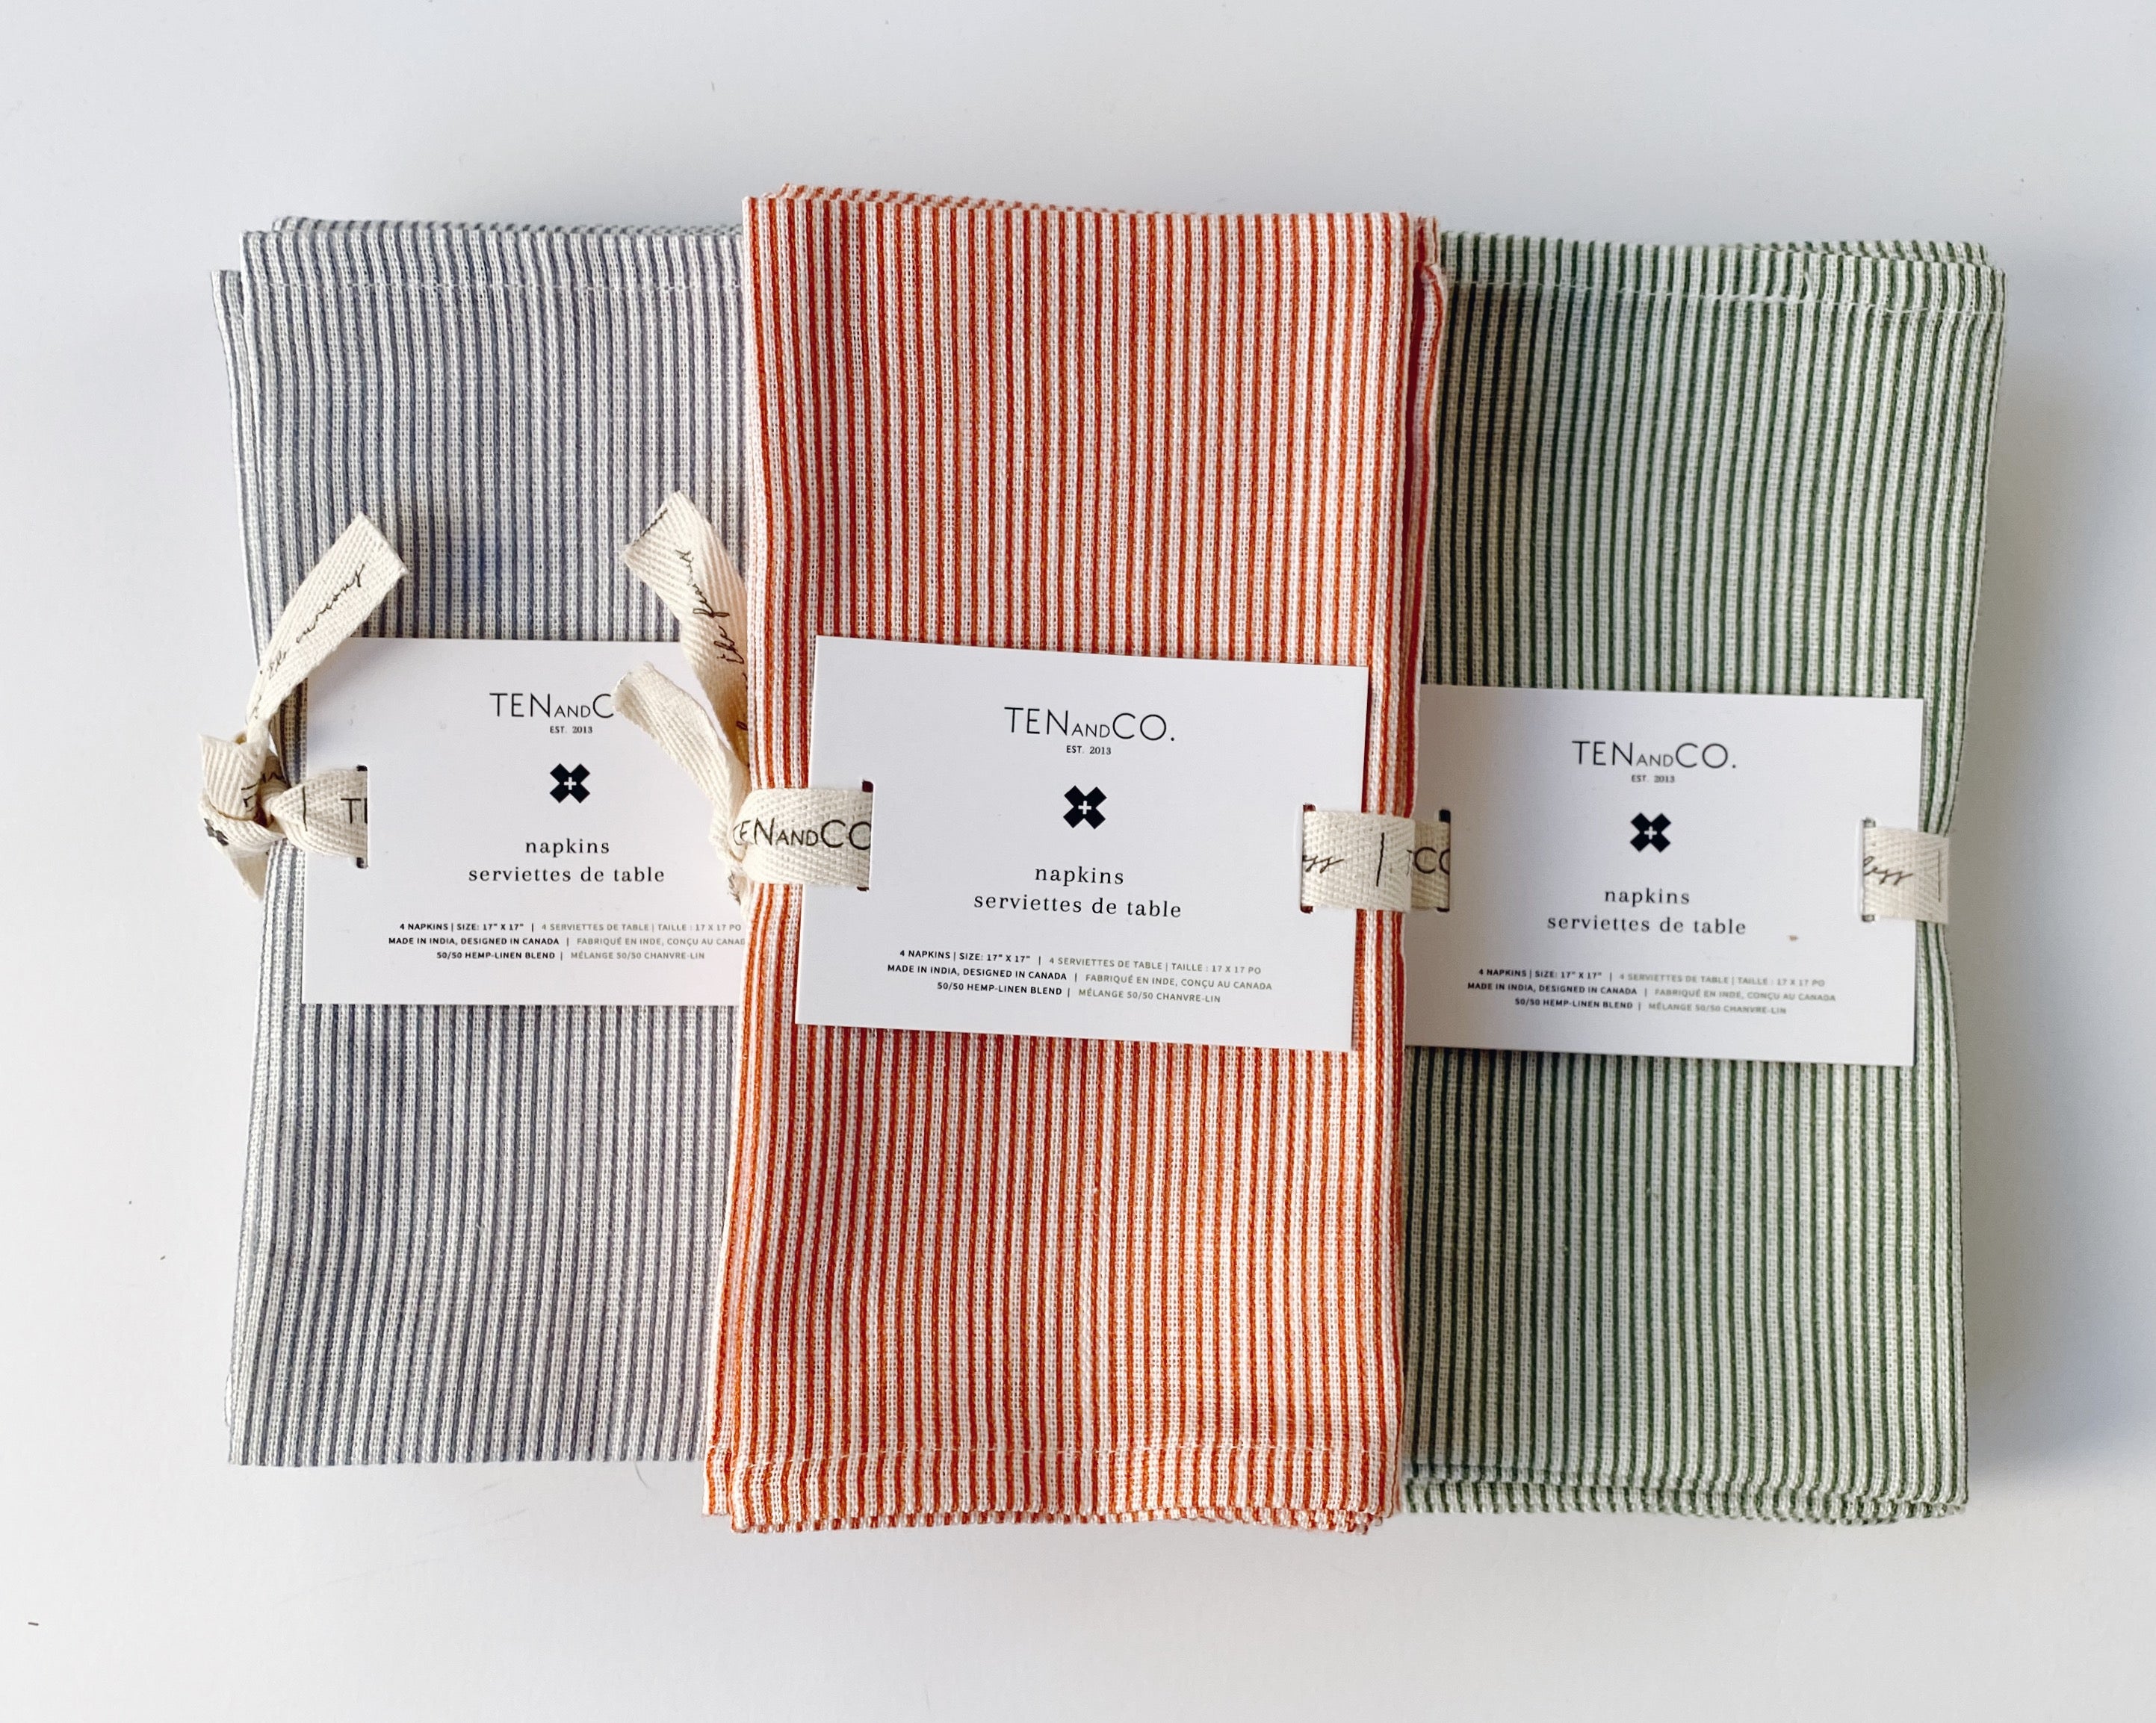 Flat lay image of 3 different sets of napkins displayed vertically. From left to right; Stripes Denim, Stripes Rust, Stripes Sage. All napkins are tied with the Ten and Co printed description label on top.